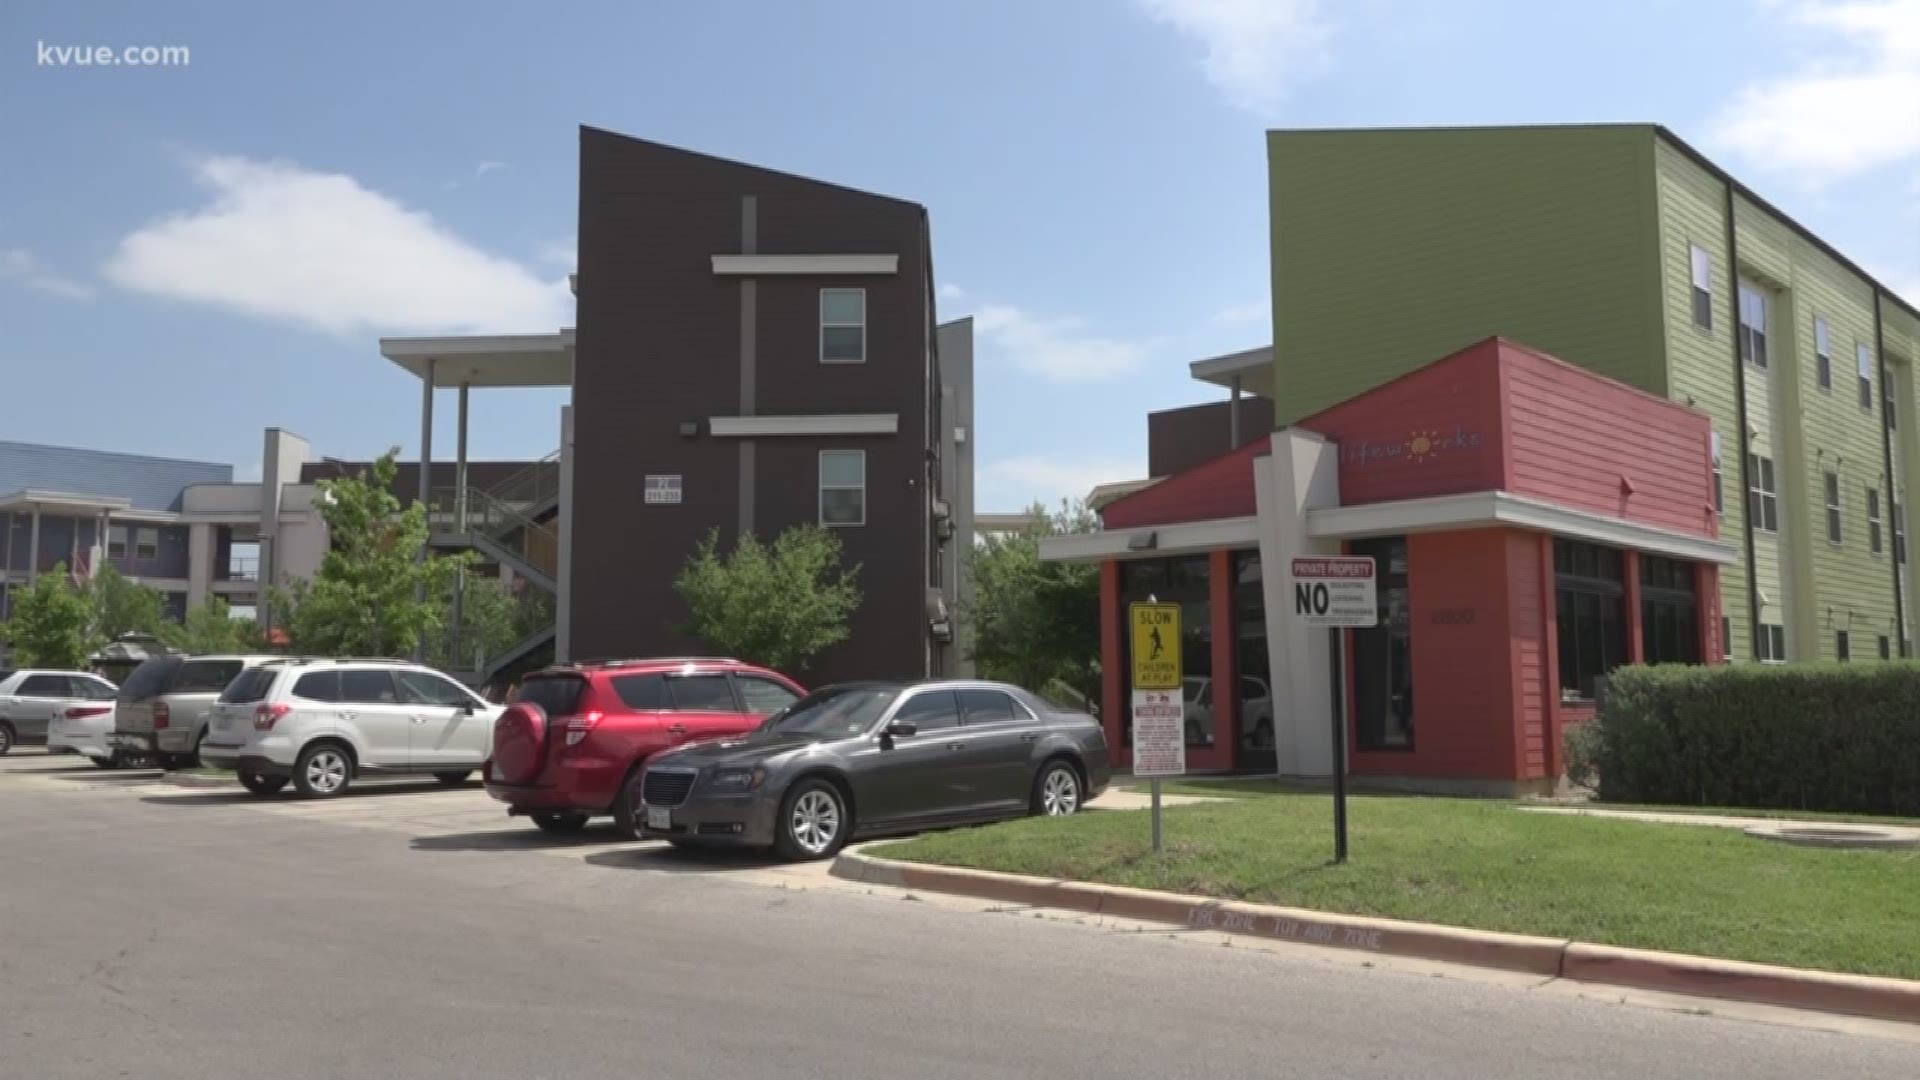 The search to find affordable housing in Austin may have just gotten a little bit easier.